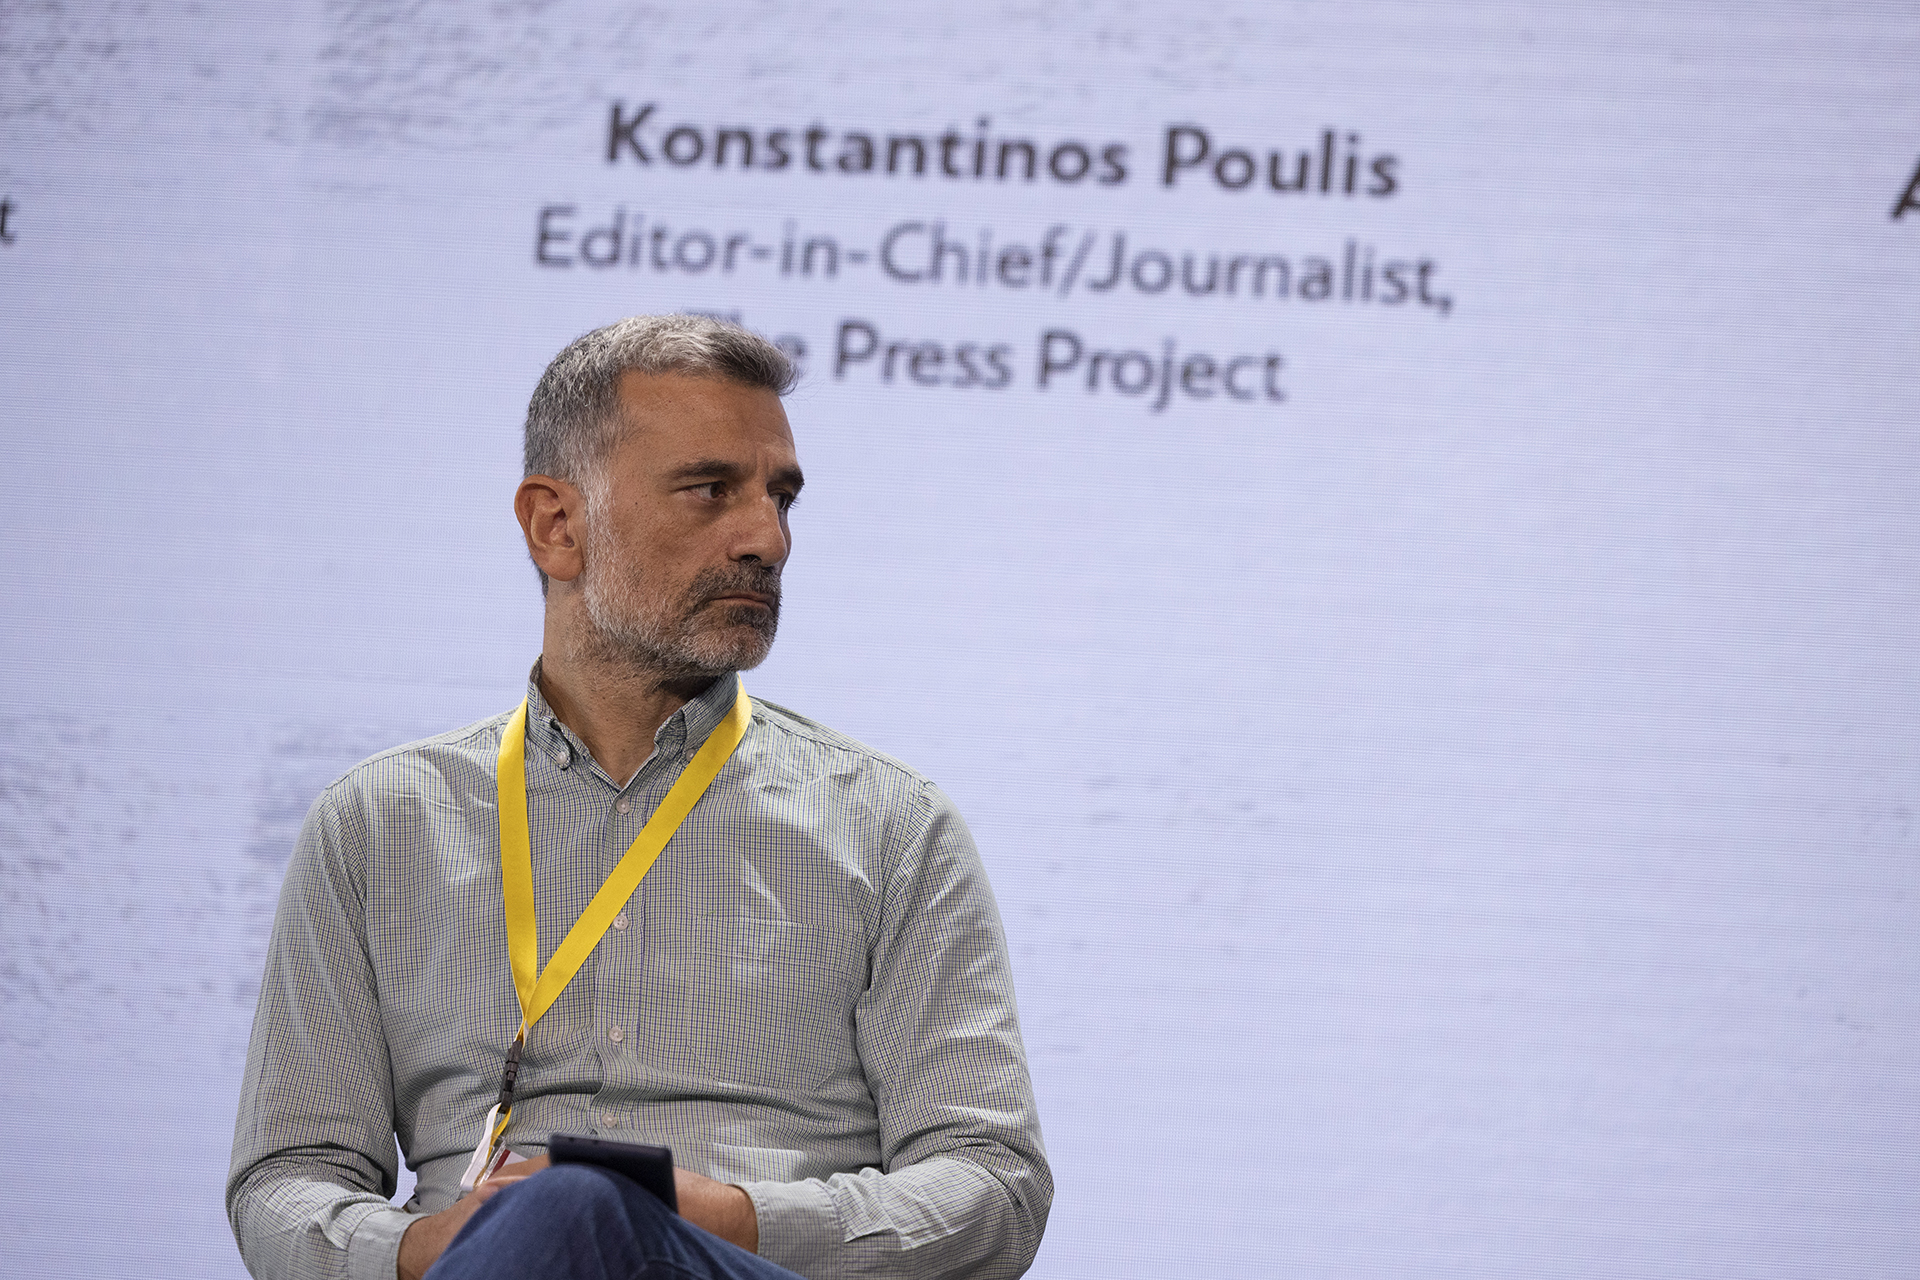 Konstantinos Poulis, Editor-in-Chief at The Press Project, at the panel “Sustainability models in an era of digital revolution” during  iMEdD International Journalism Forum 2023. He is sitting on a chair looking reflective on his left side. On the background screen stands his name and title.